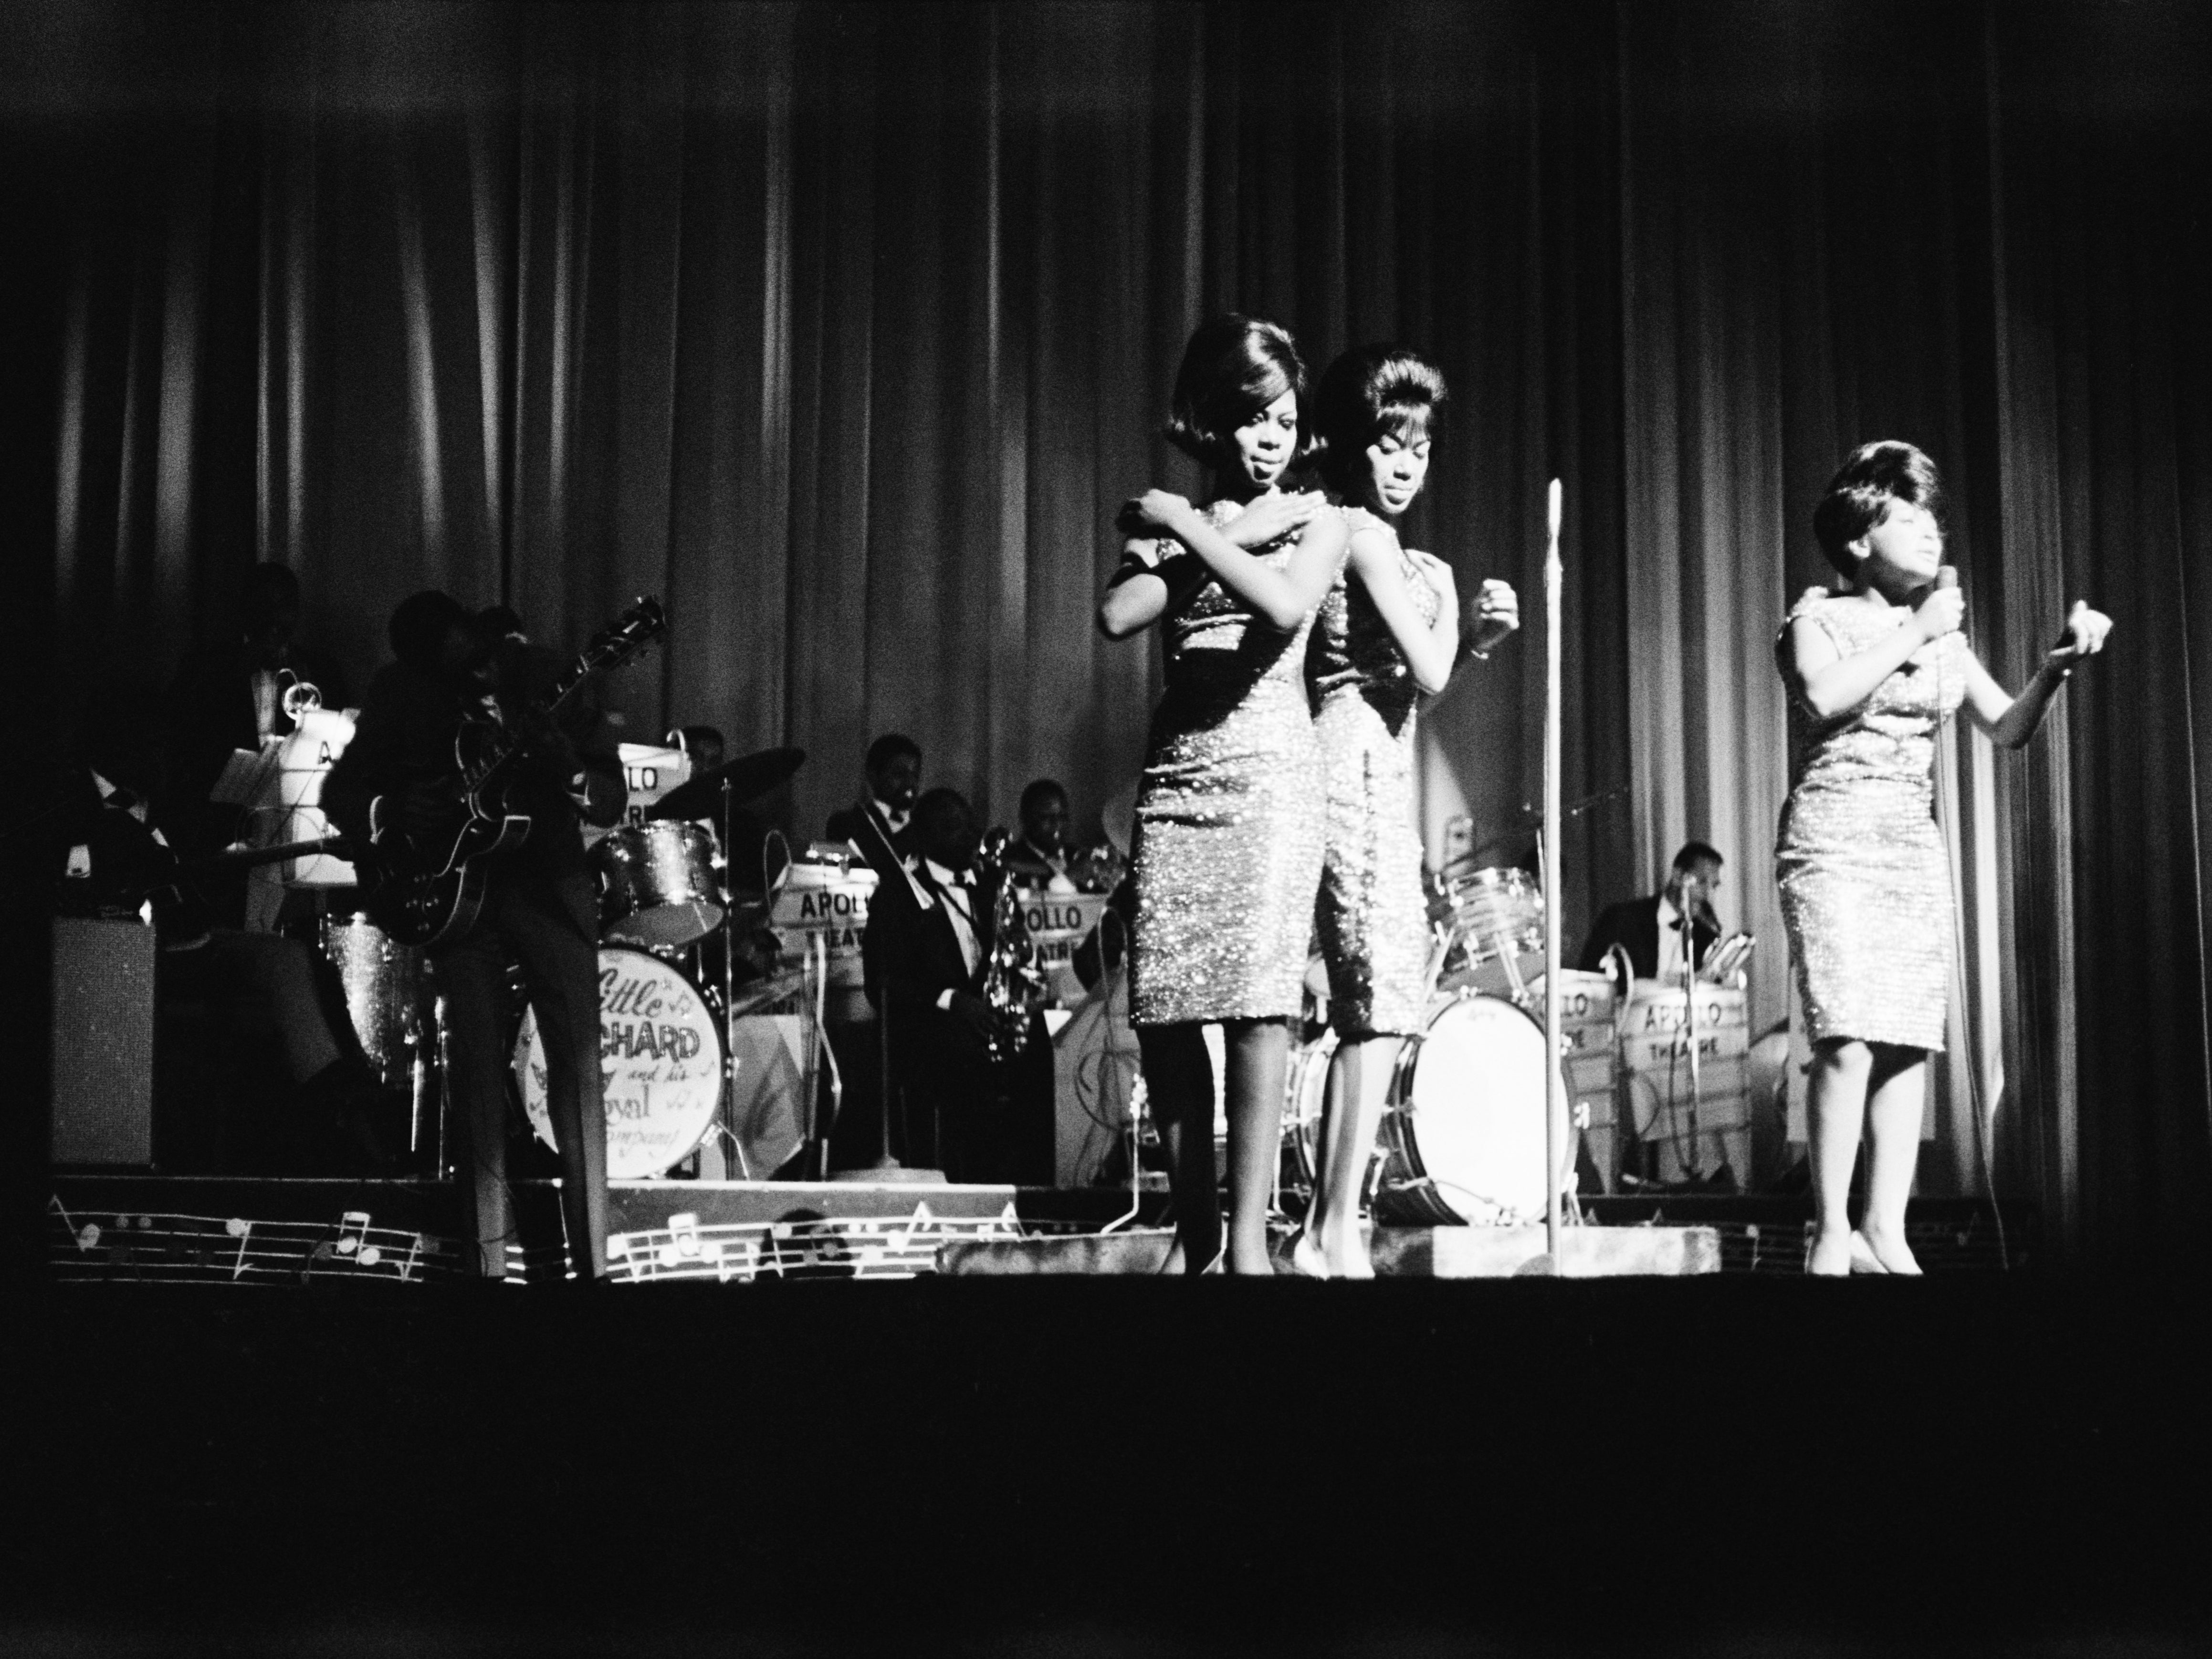 American vocal group The Marvelettes perform at the Apollo Theatre in New York City, circa 1965